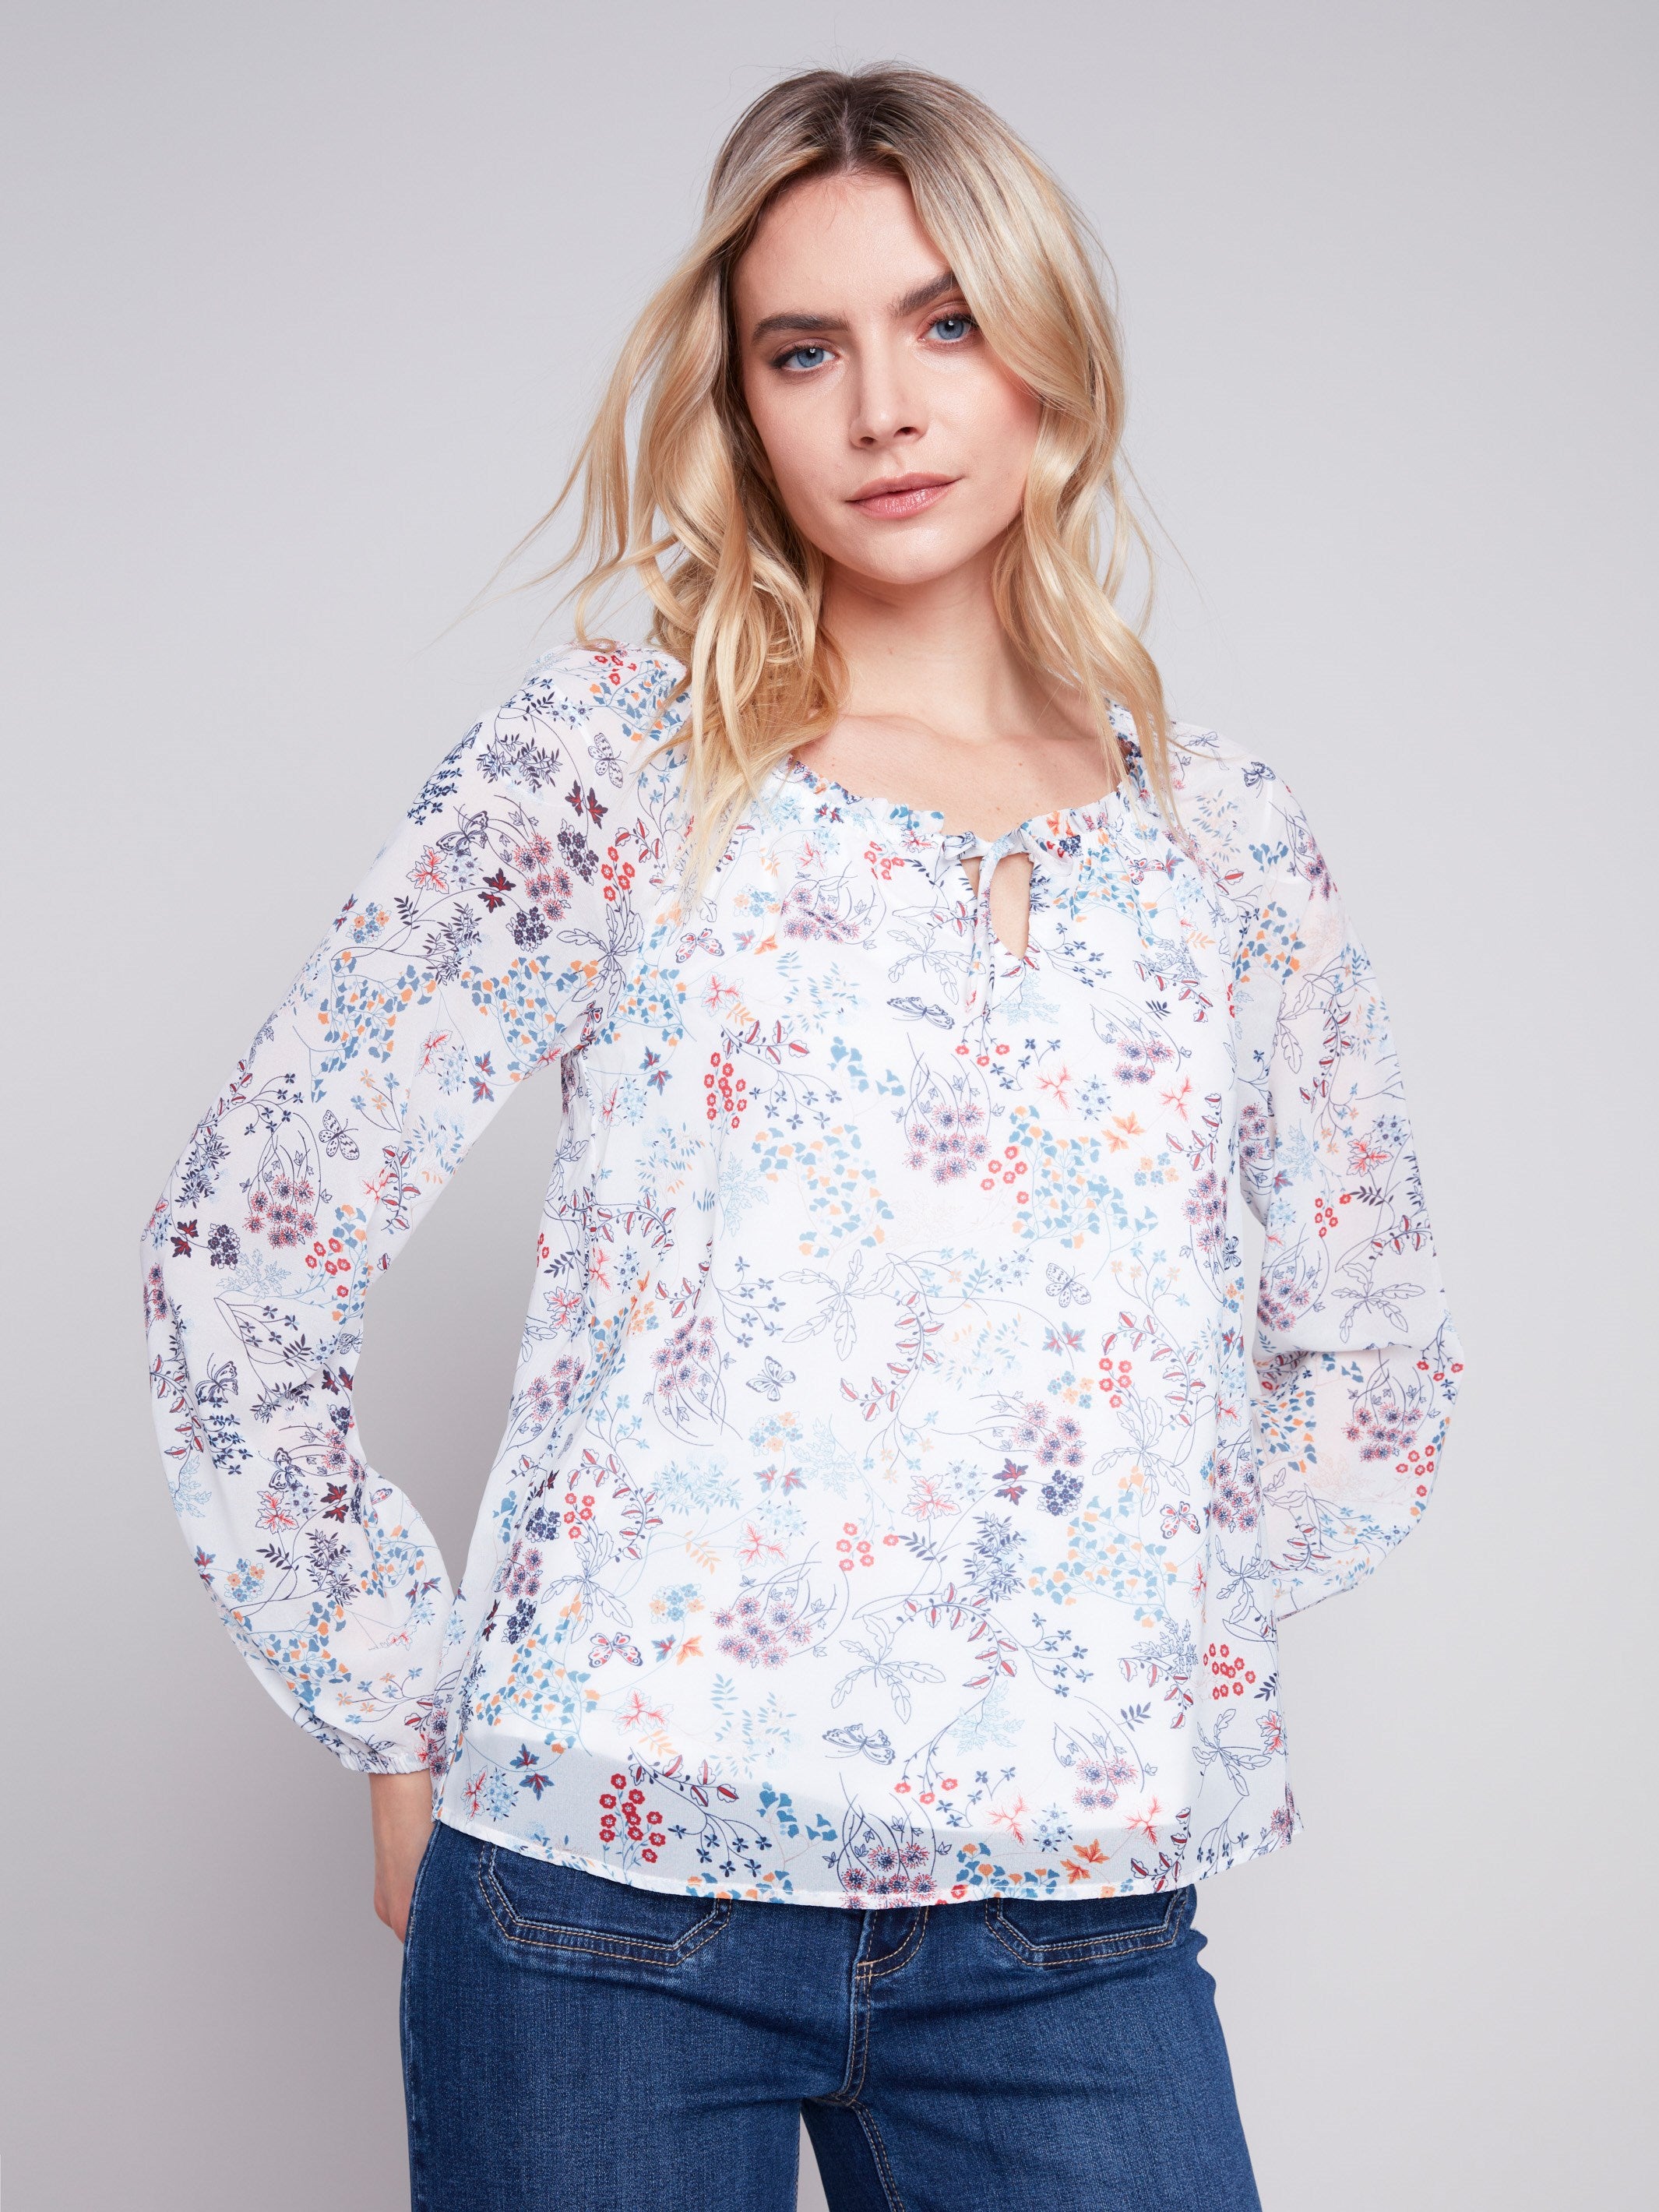 Printed Chiffon Blouse - Blossom - Charlie B Collection Canada - Image 1